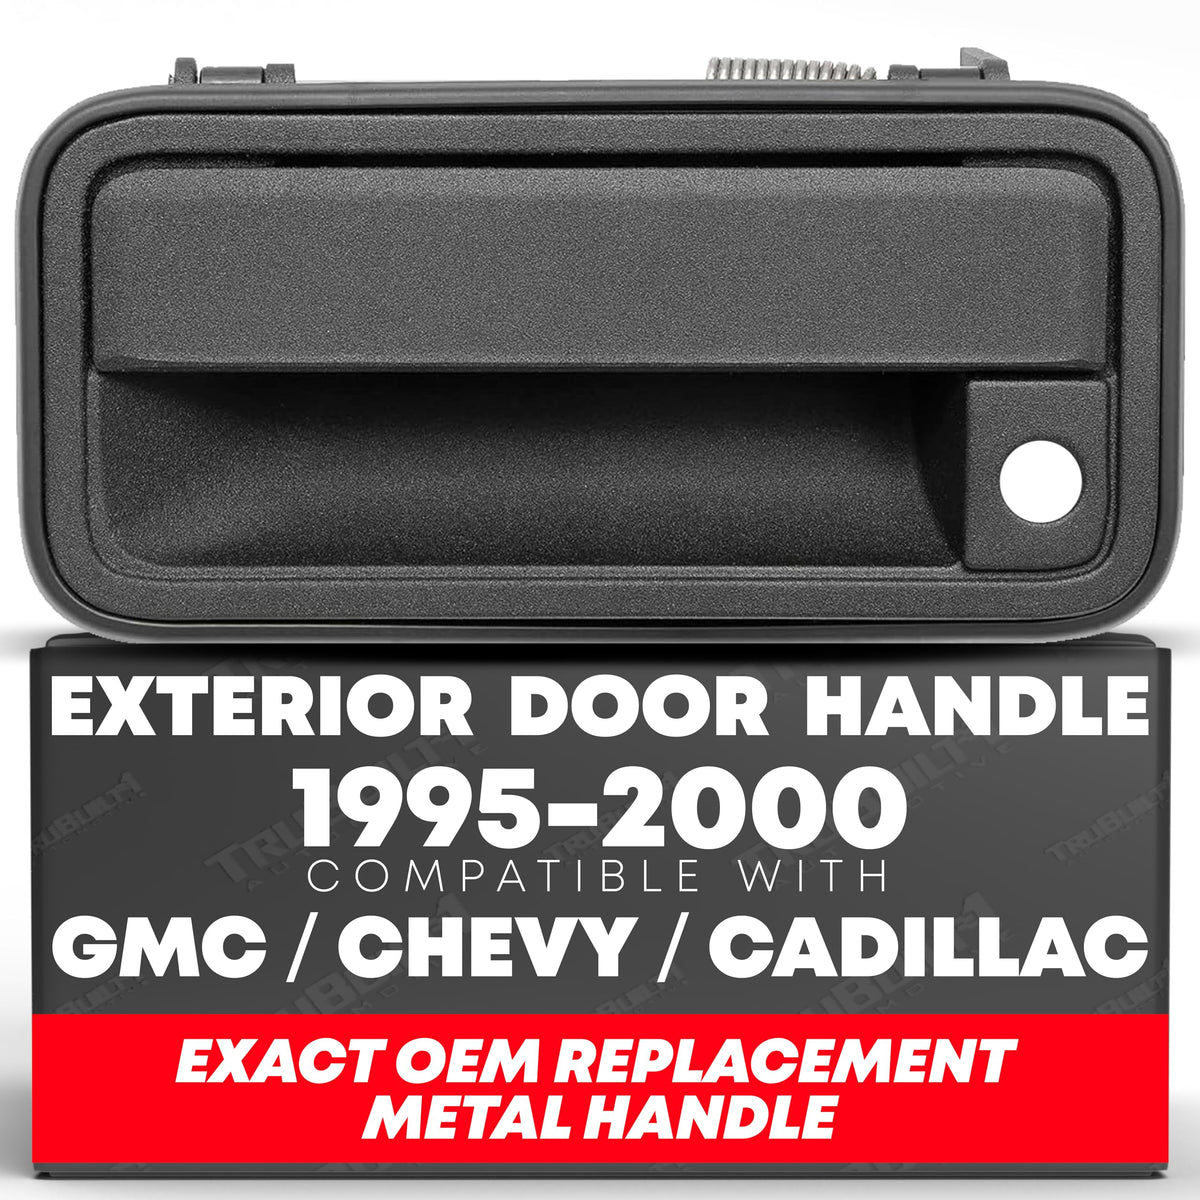 Exterior Front Left Side - Metal Lever | Compatible with 1988-2001 Chevy K1500 K2500 K3500 C1500 C2500 C3500, GMC C/K 1500 2500 3500 Pickup Suburban, Tahoe, Yukon, Cadillac, 15742229, 77072